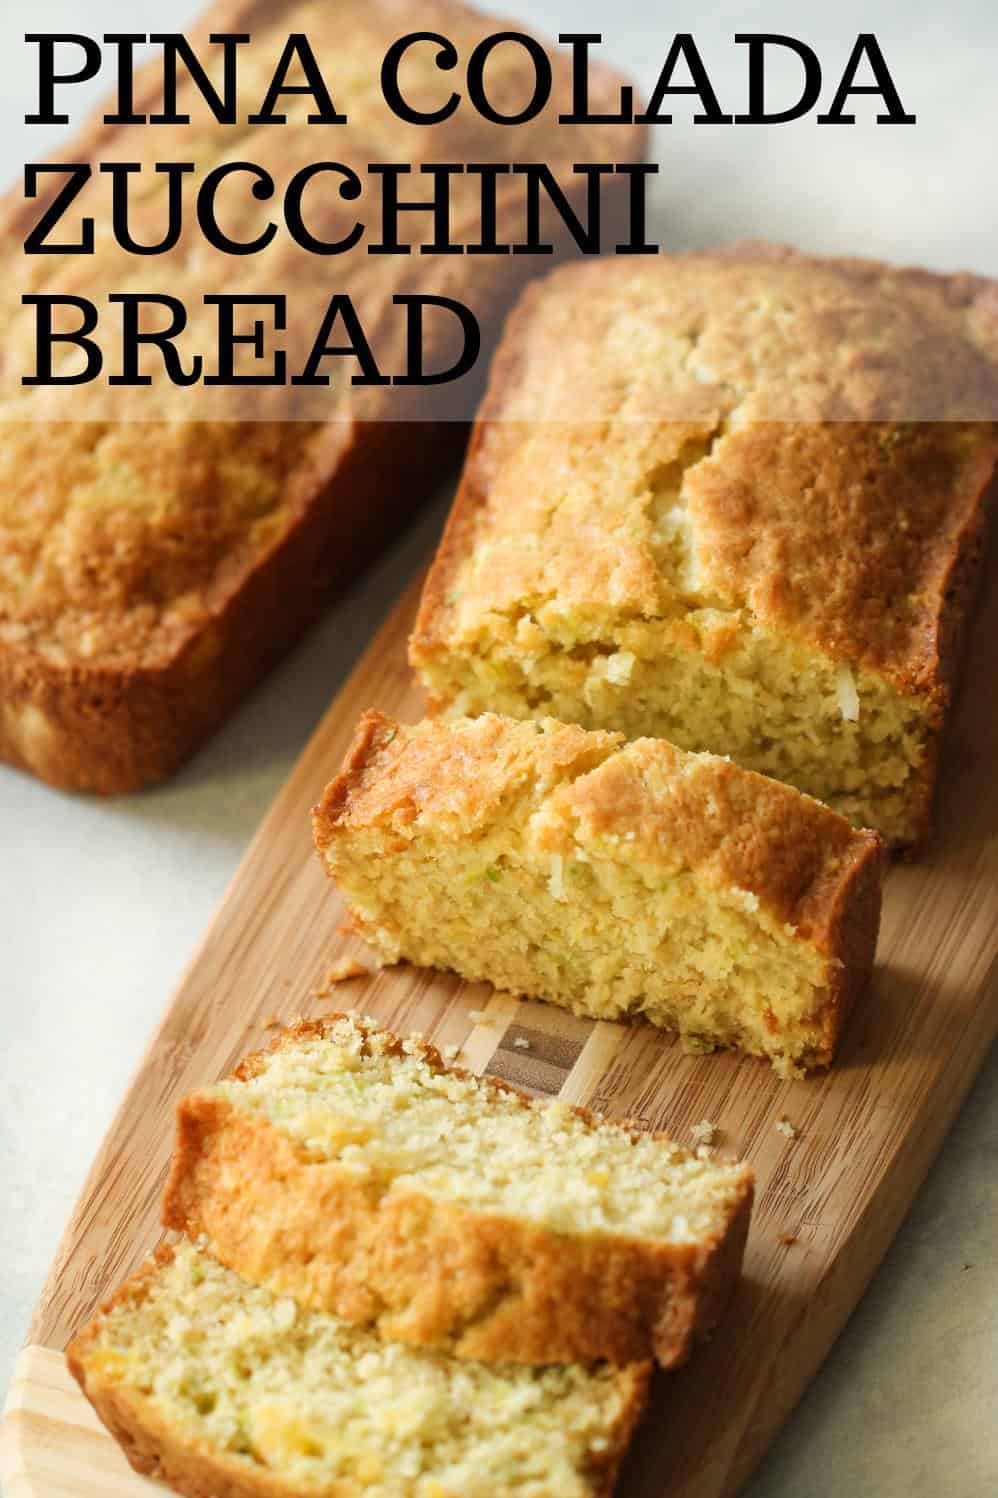  Sweet and tropical flavors meet in this Pina Colada Zucchini Bread!